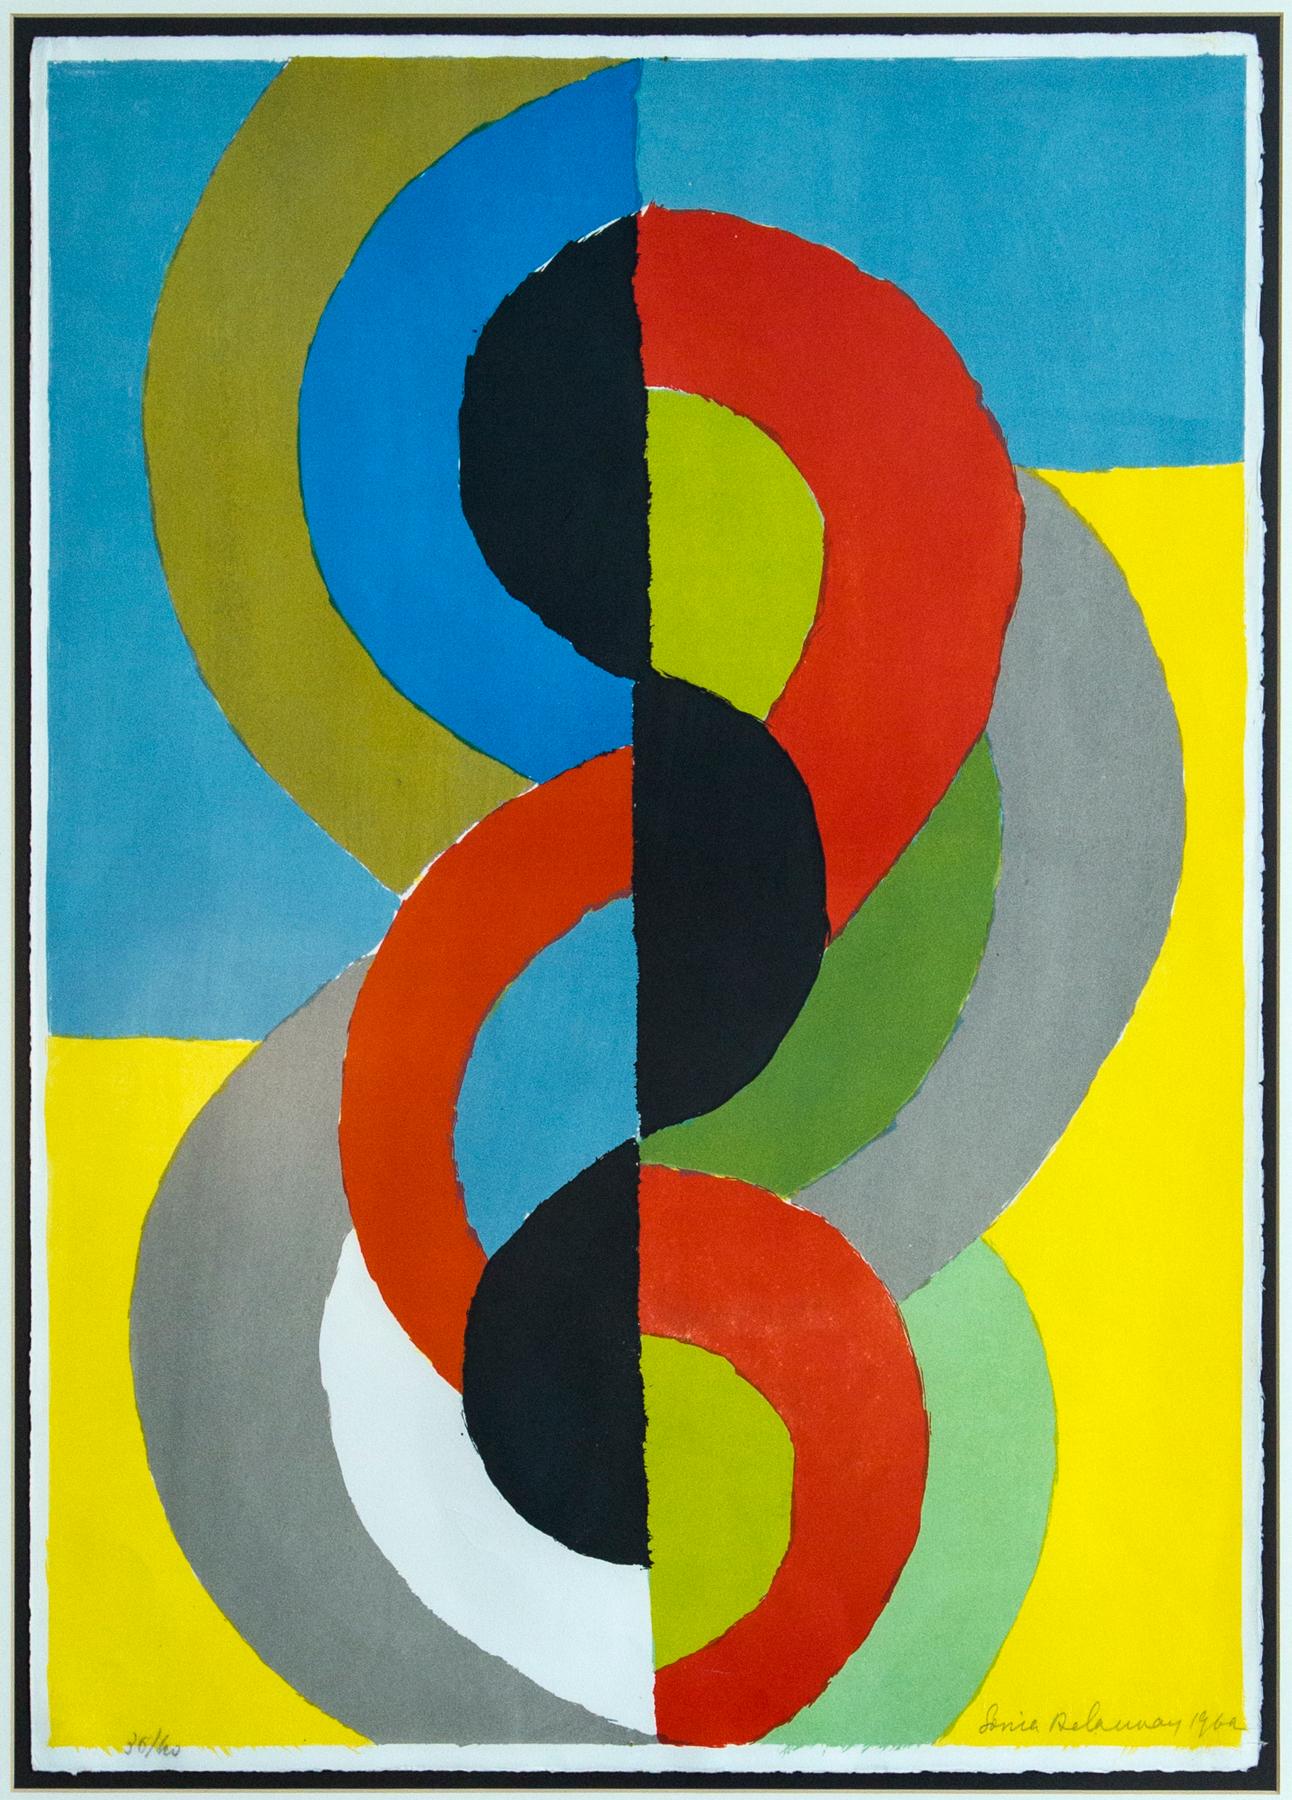 Sonia Delaunay geometric lithograph, 1962, Edition 36/60. Signed, dated and editioned in pencil on print recto.